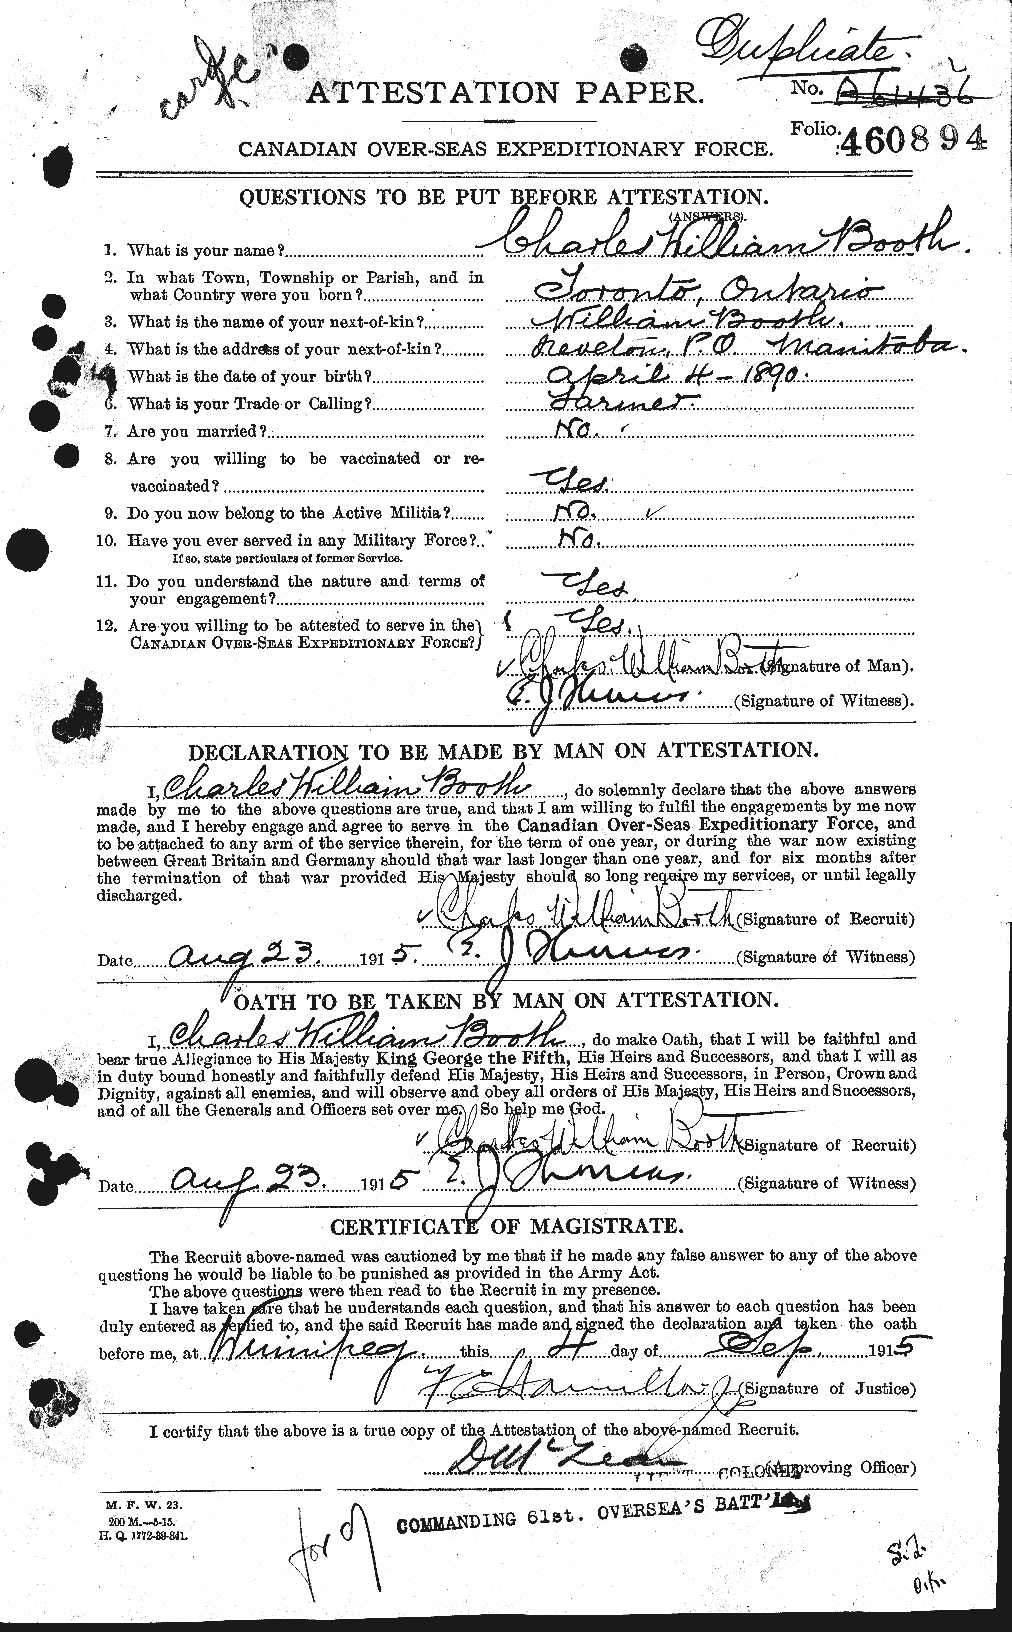 Personnel Records of the First World War - CEF 250805a